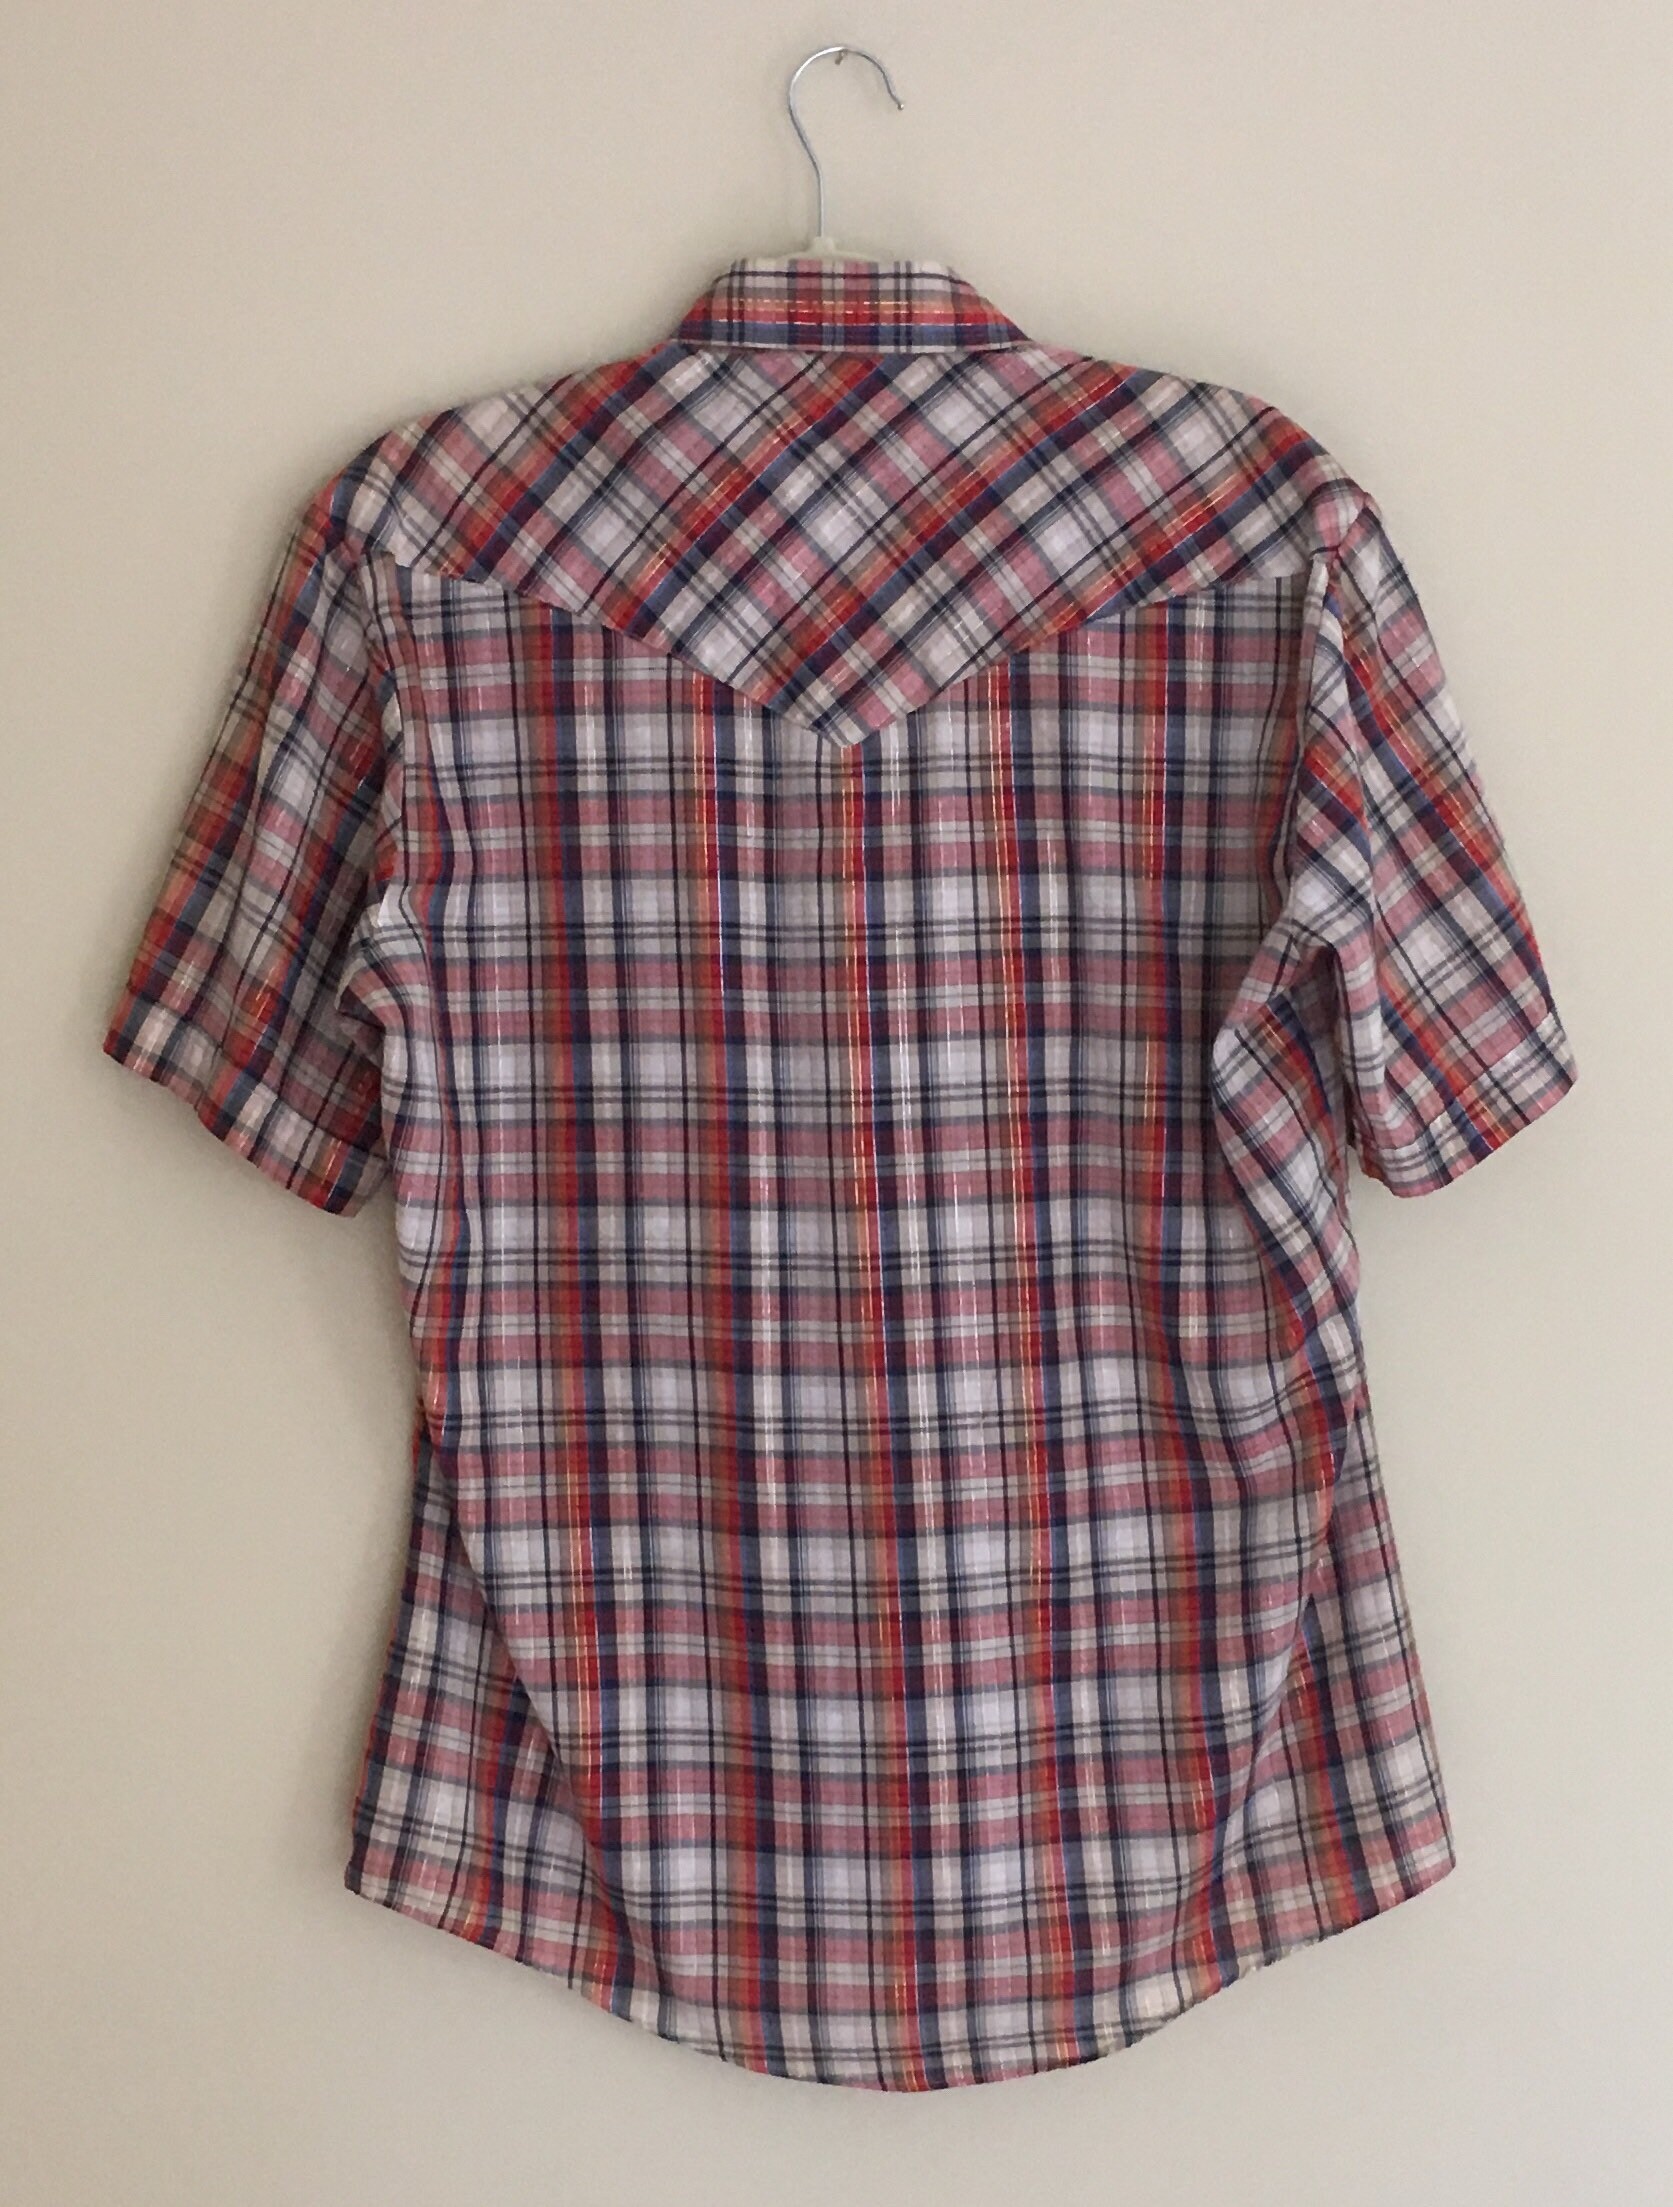 Mens Western Snap Shirt Vintage Ely Plains Red Plaid Mother of Pearl ...